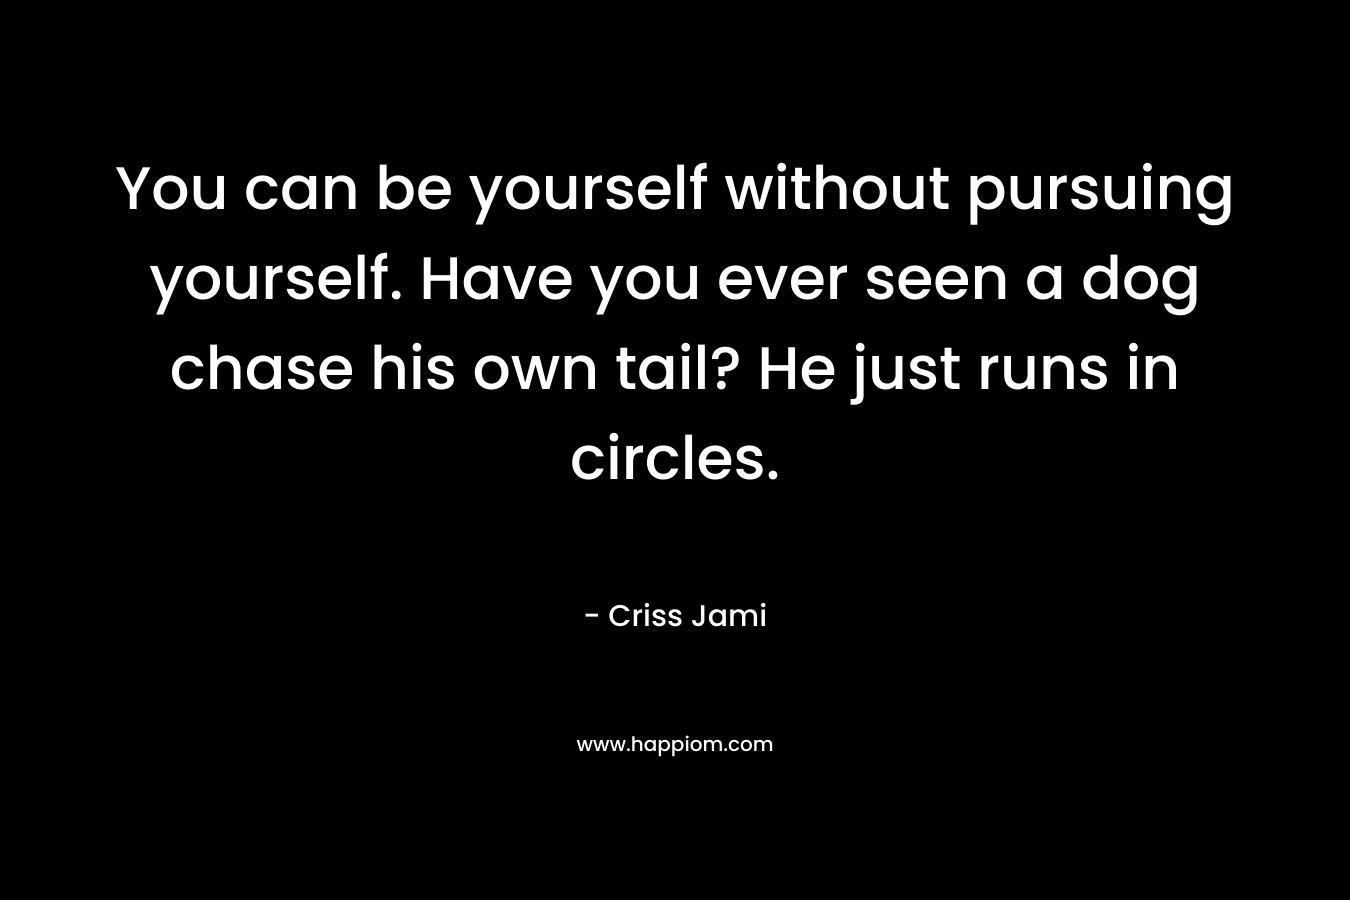 You can be yourself without pursuing yourself. Have you ever seen a dog chase his own tail? He just runs in circles.